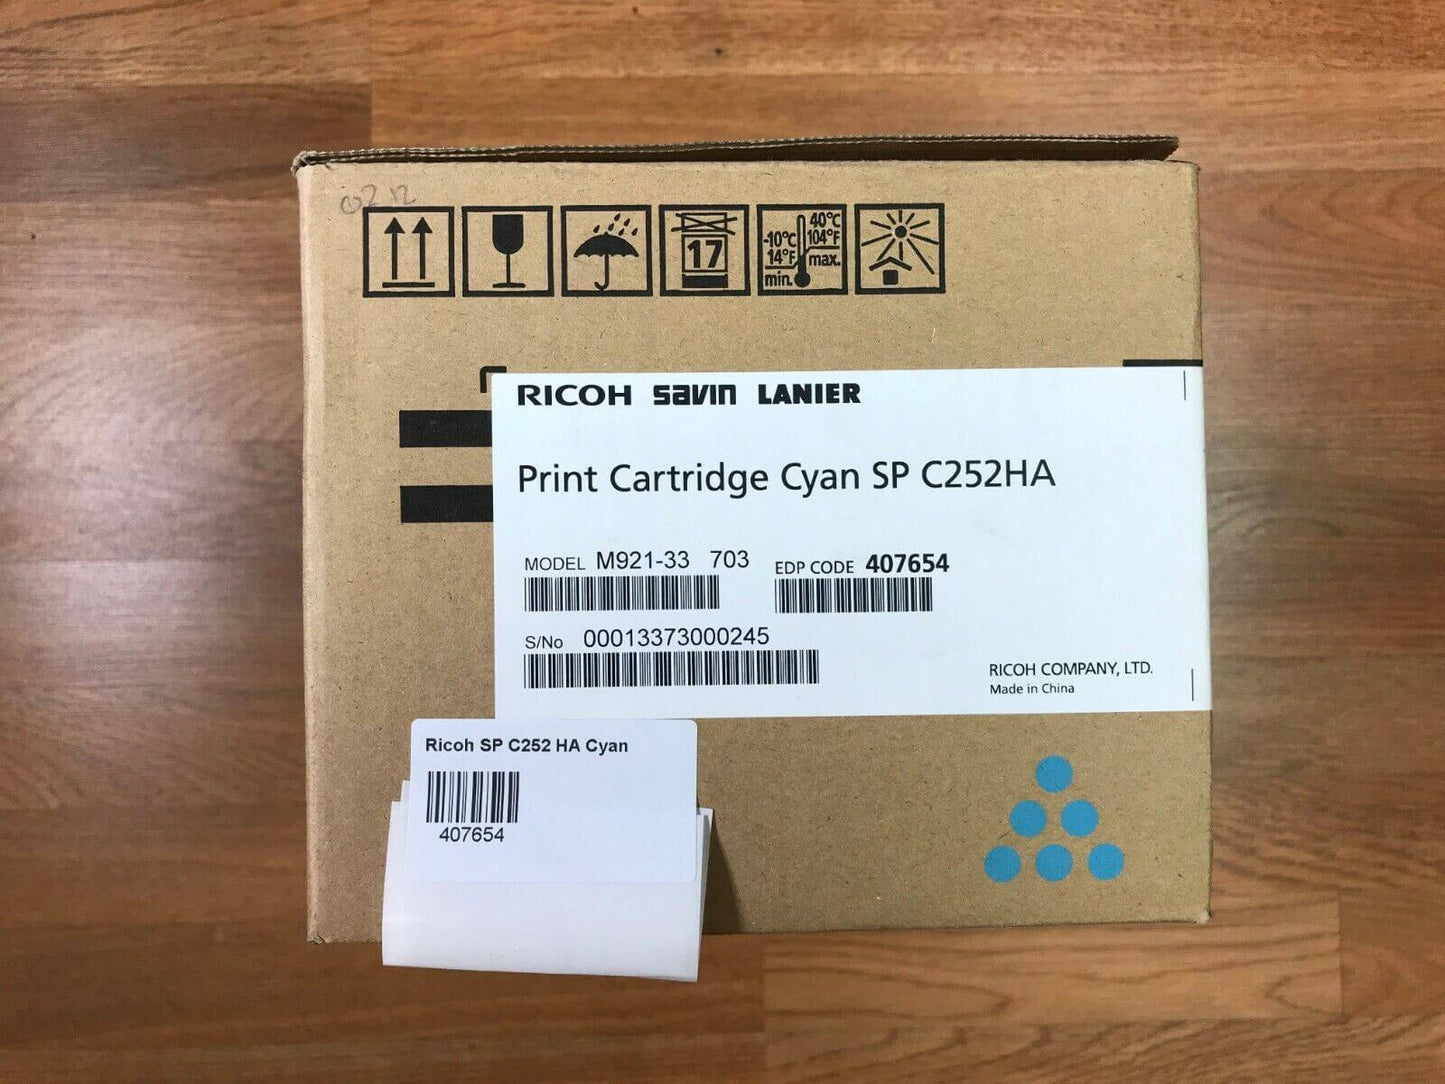 Barely Used Ricoh SP C252HA 407654 Cyan Print Cartridge - Same Day Shipping!!!!! - copier-clearance-center